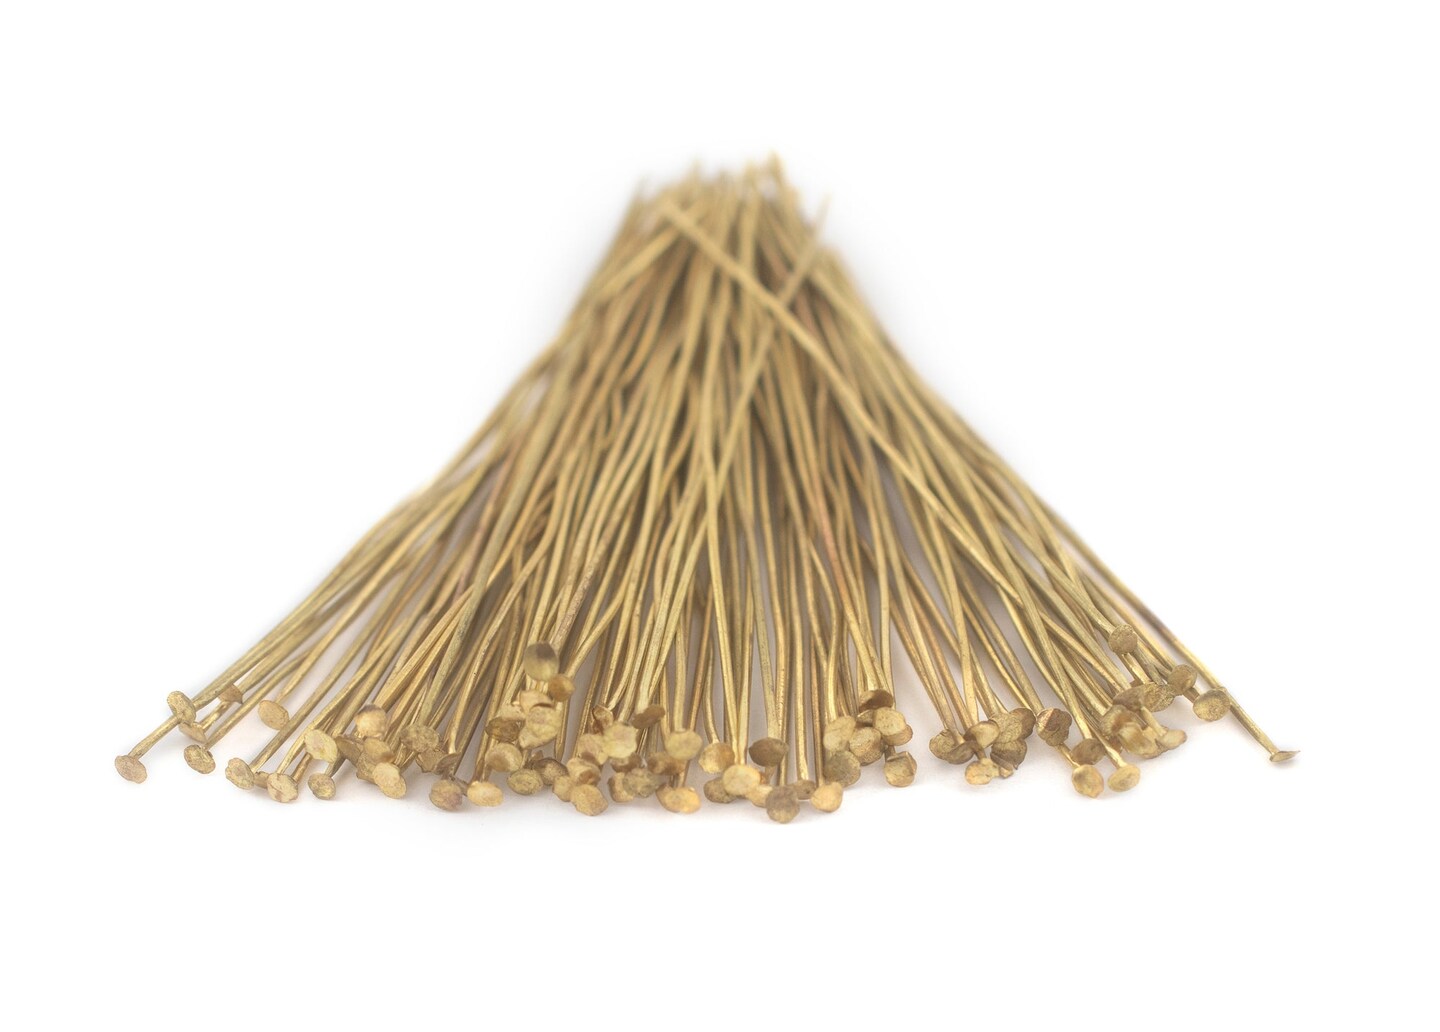 TheBeadChest Brass 21 Gauge 3 Inch Head Pins (Approx 100 pieces)